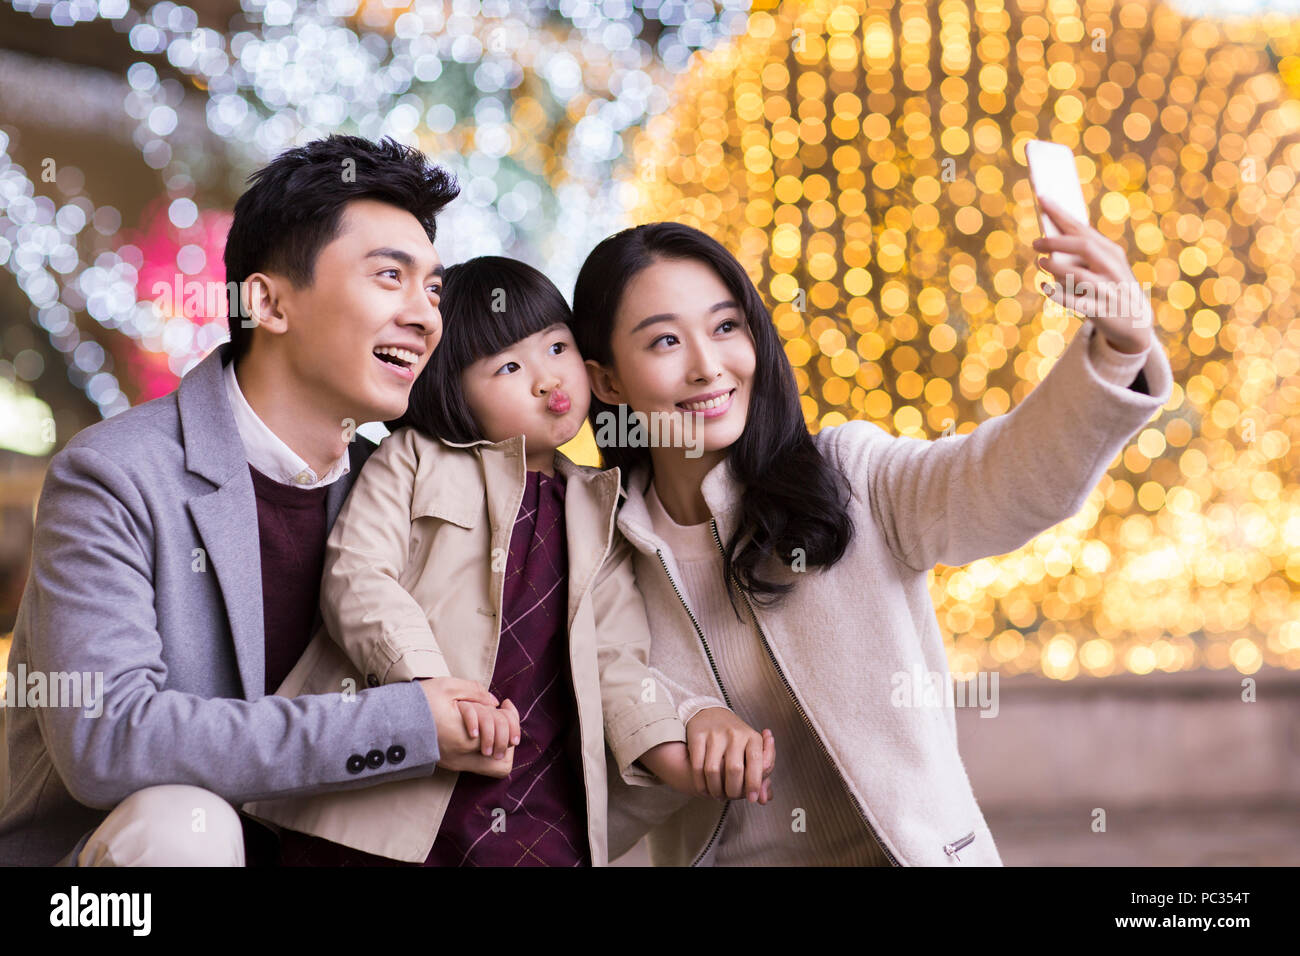 Cheerful young Chinese family taking self portrait with smart phone Banque D'Images